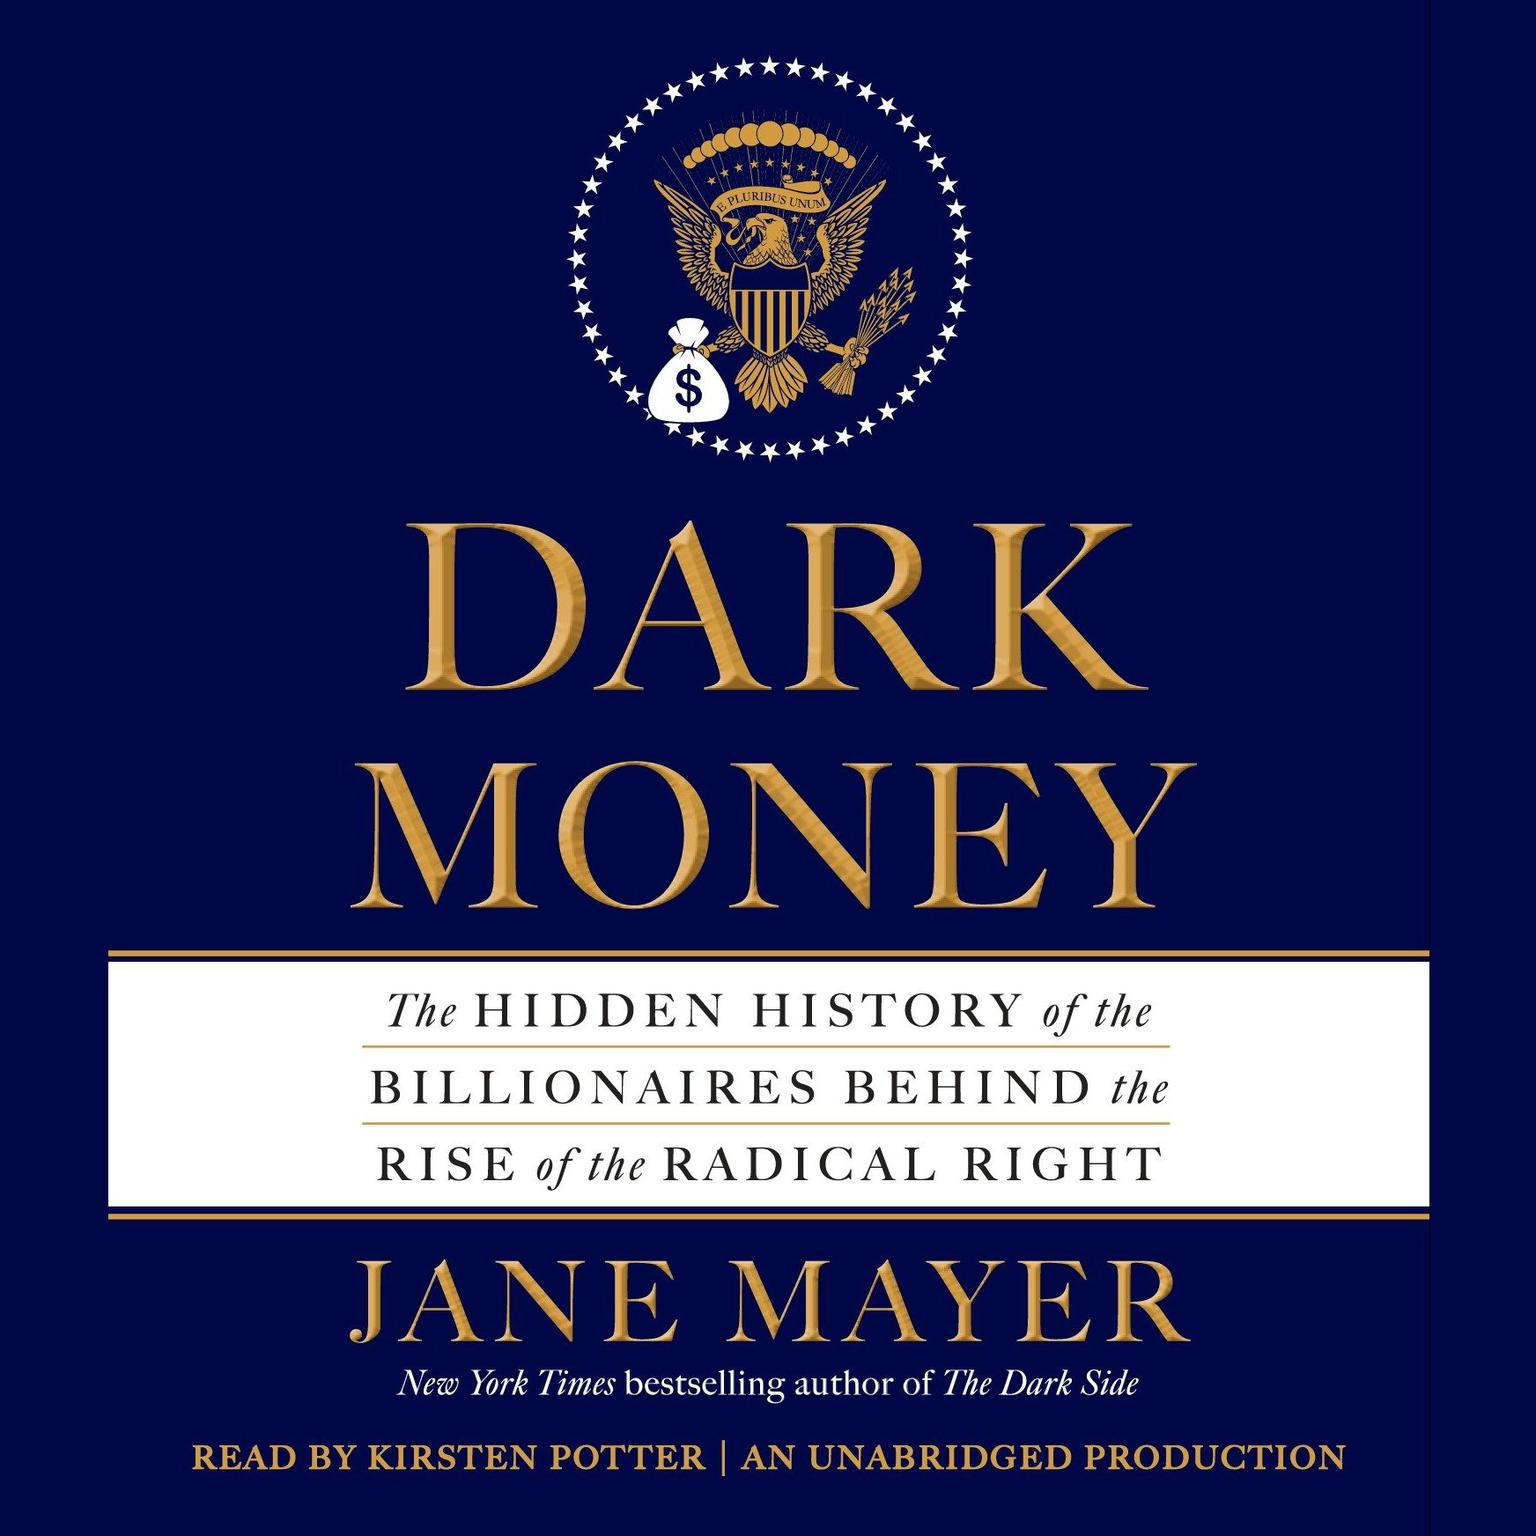 Dark Money: The Hidden History of the Billionaires Behind the Rise of the Radical Right Audiobook, by Jane Mayer